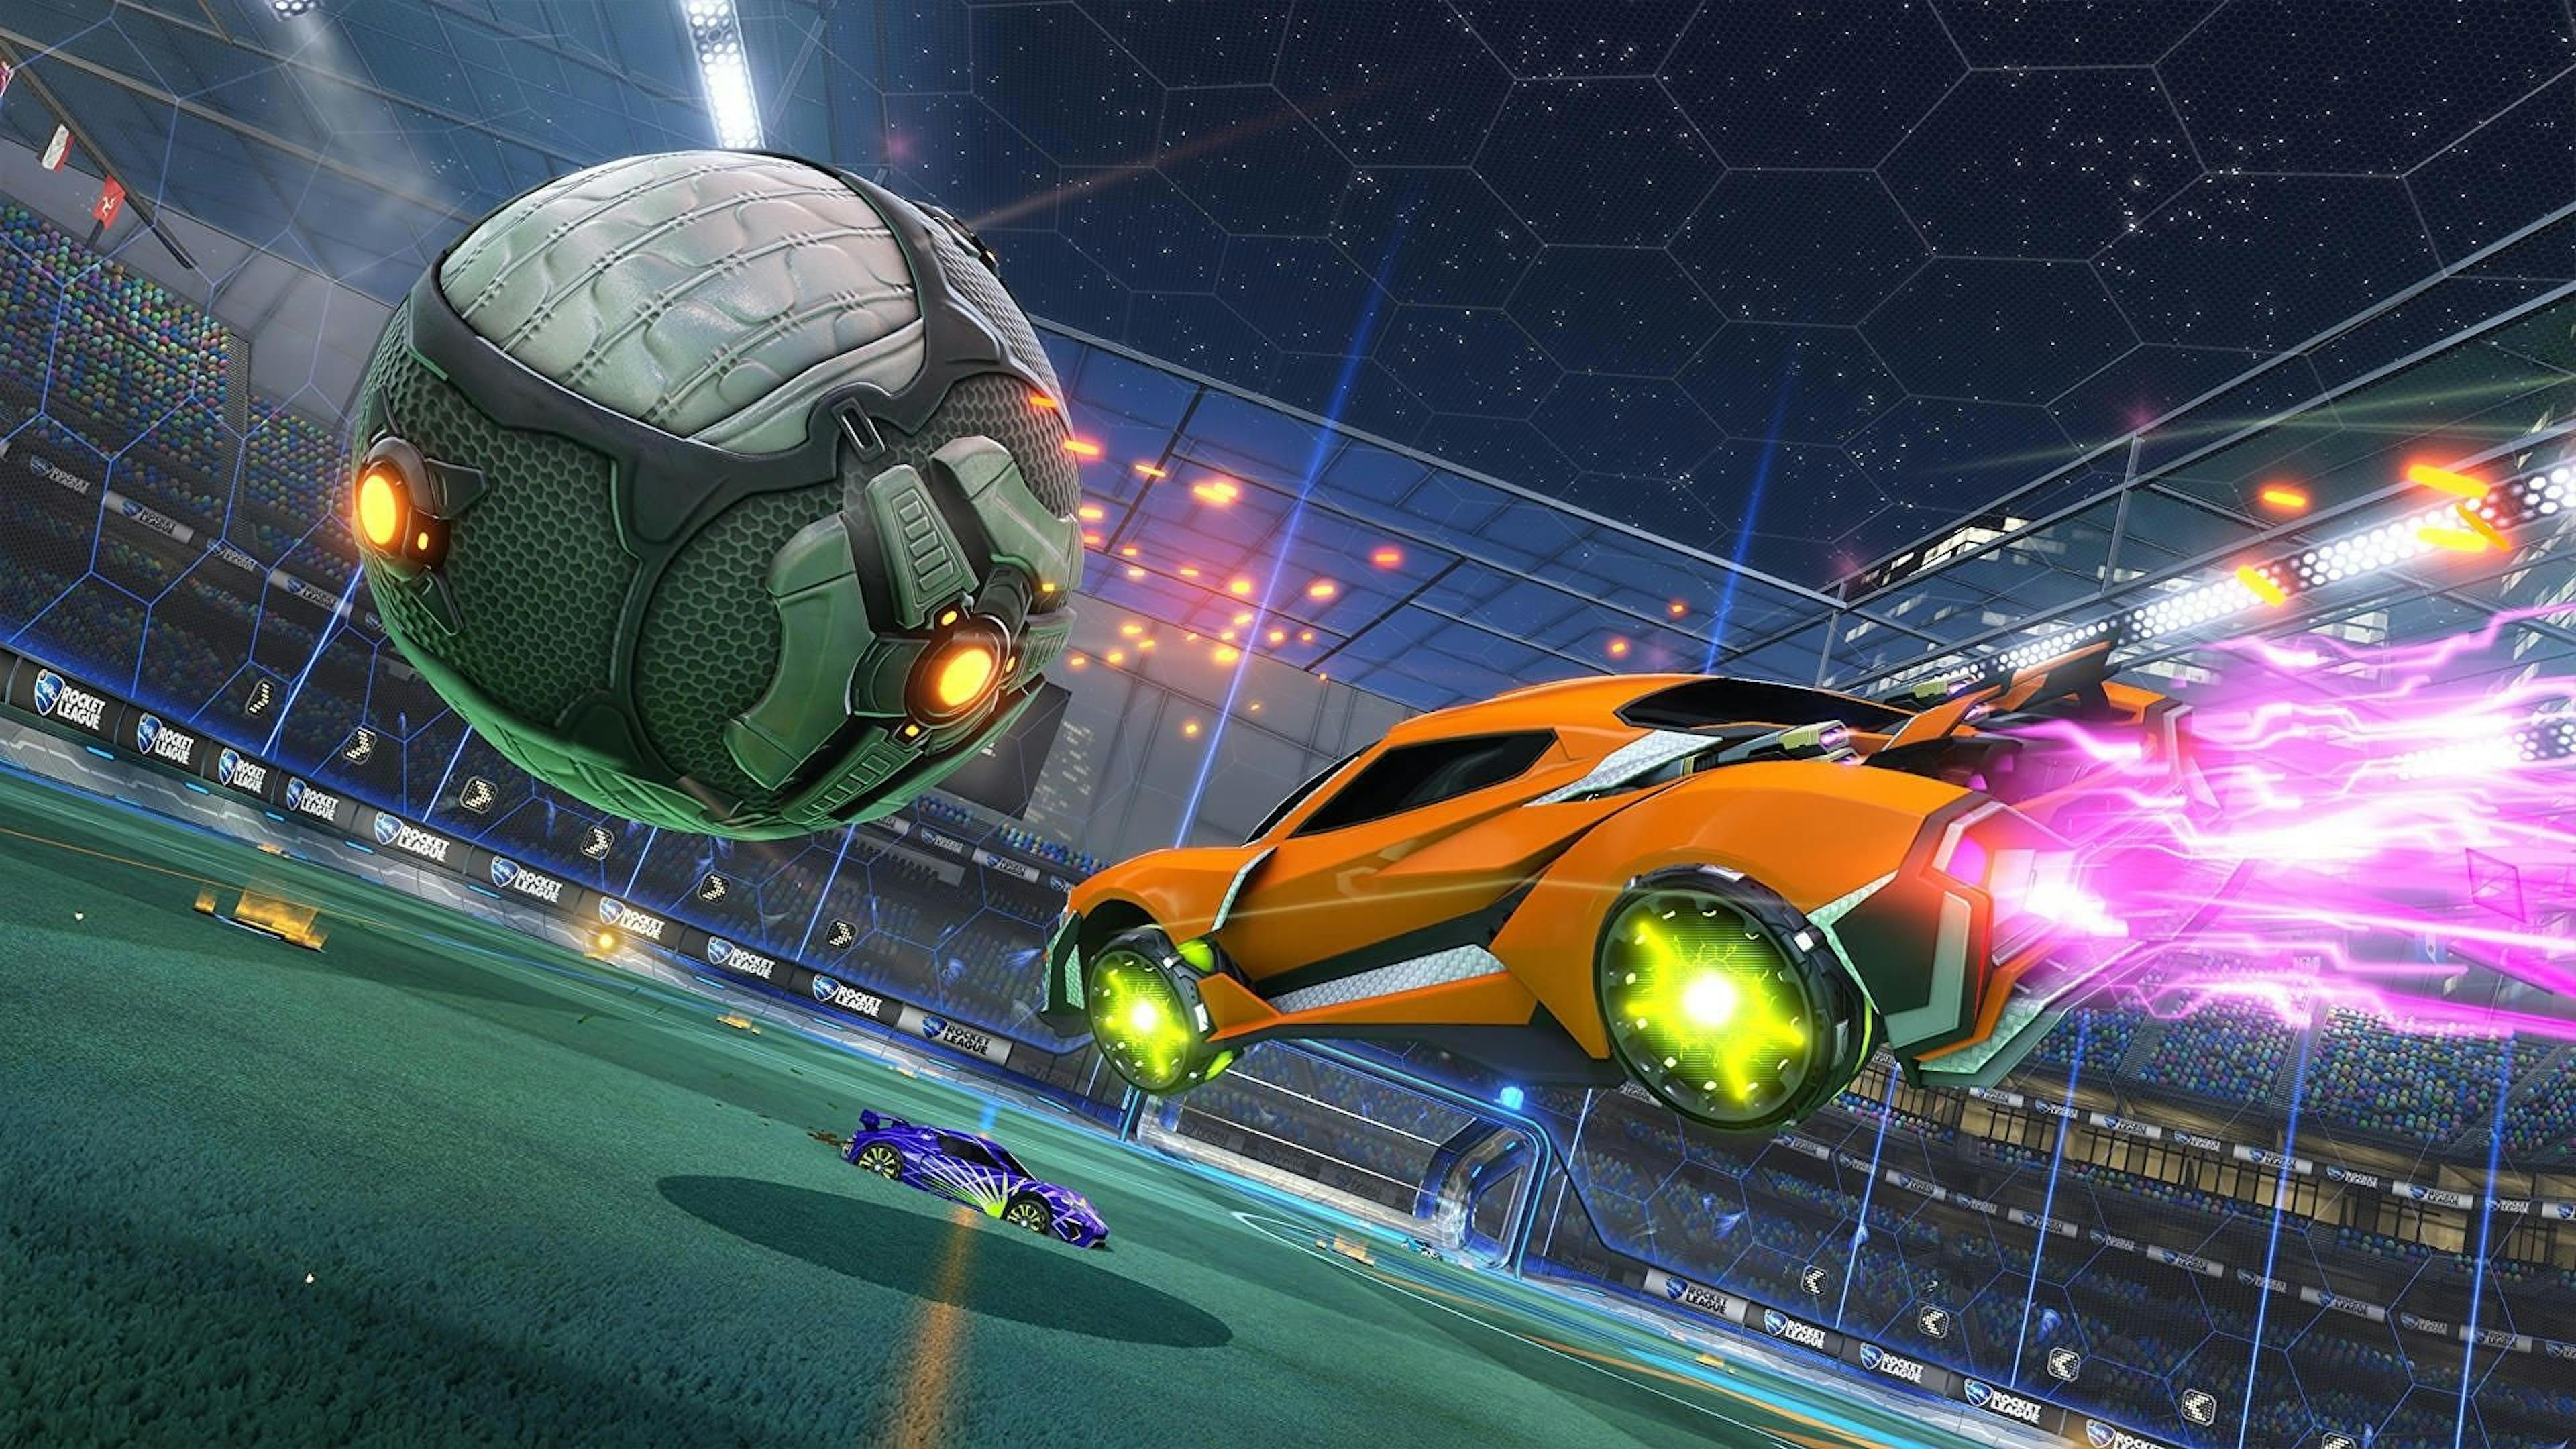 Animated car screenshot from the game Rocket League